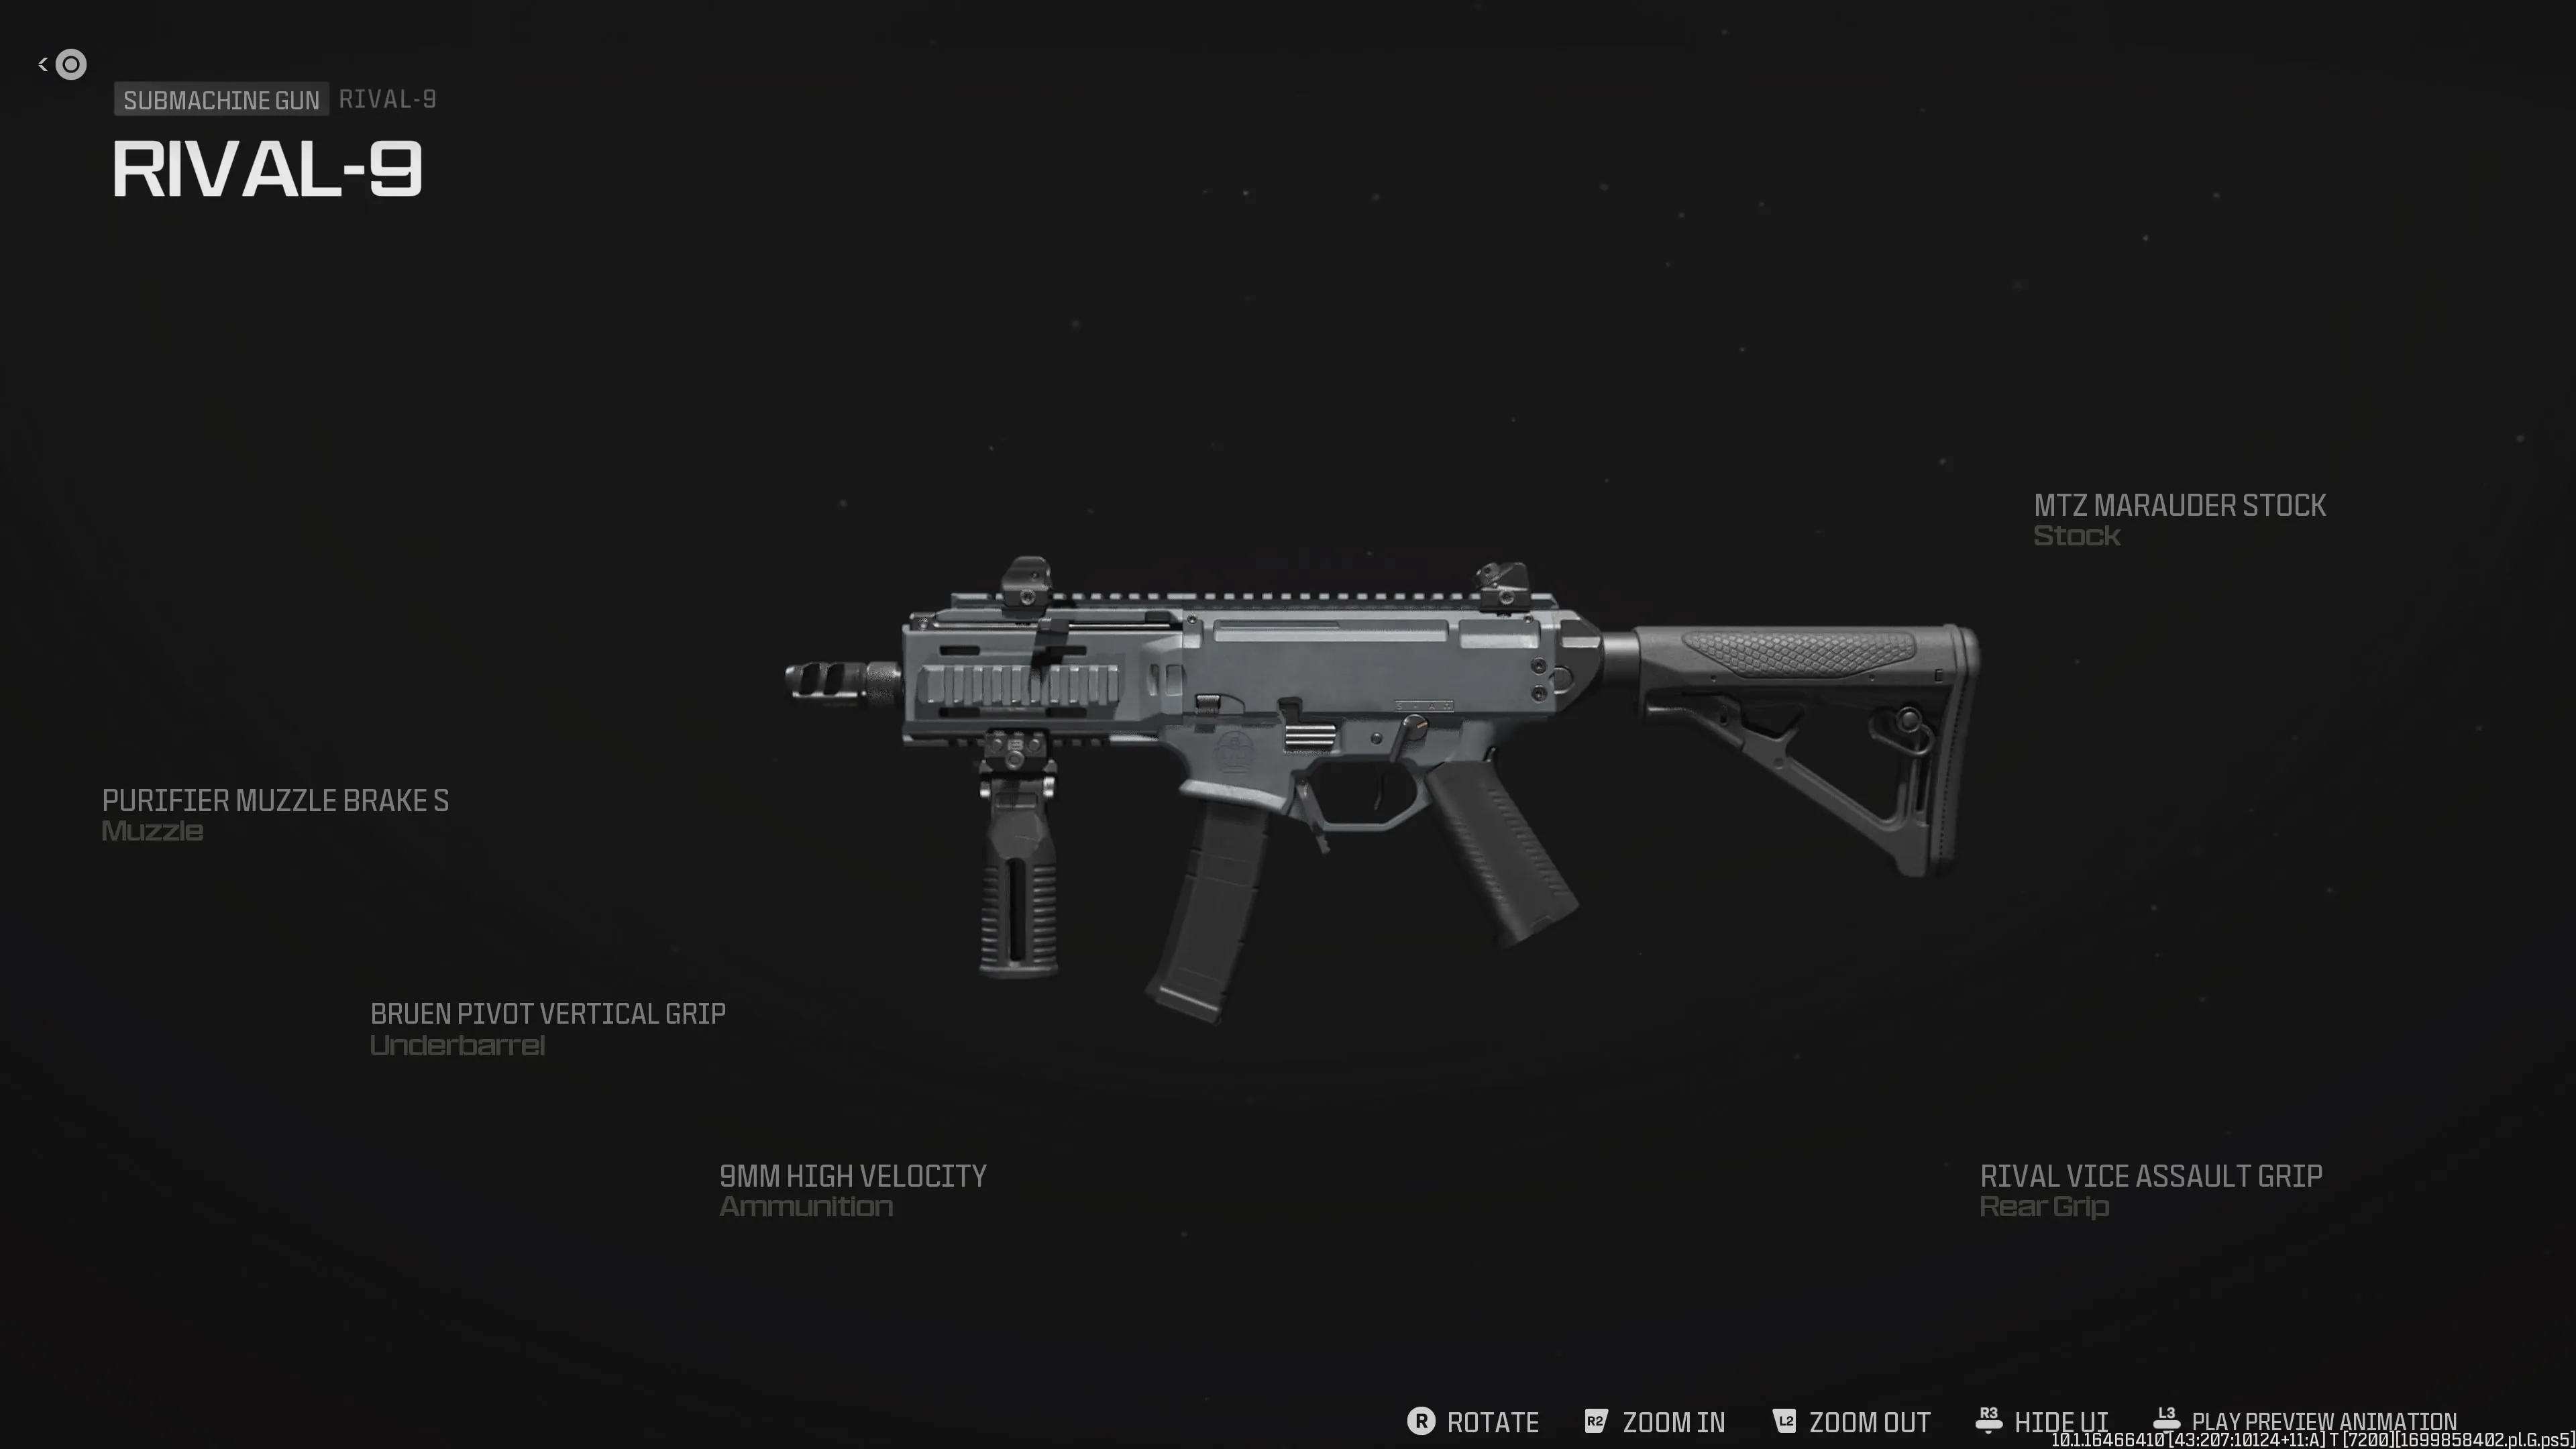 A screenshot of the best Rival-9 loadout in MW3.